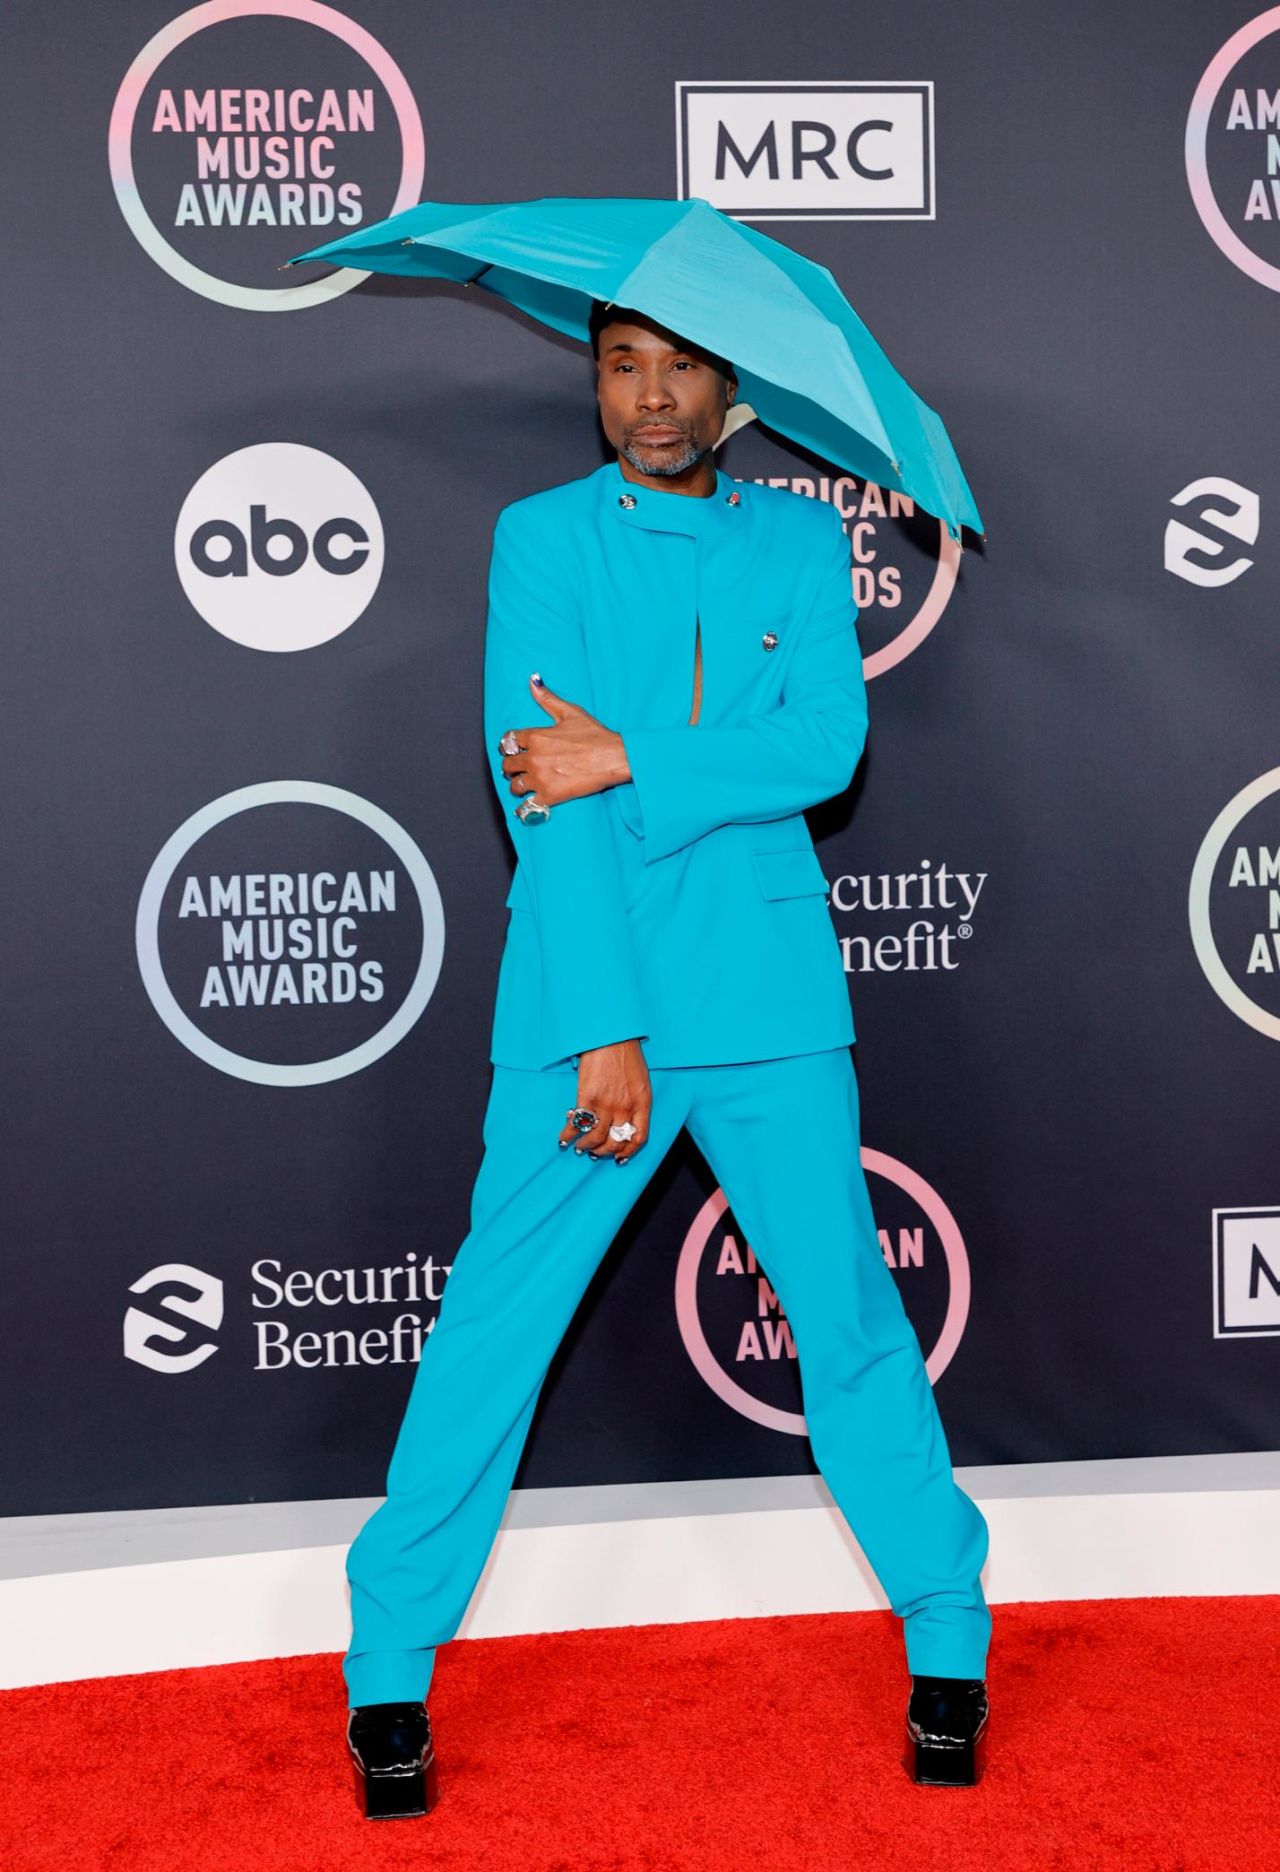 "Pose" star Billy Porter has made a name as one of the red carpet's most exciting arrivals, with his flamboyant, gender-fluid outfits. Porter turned to aquatic clothing brand Botter for his blue outfit, which featured a keyhole cut out and an umbrella-shaped hat -- paired with a pair of black glossy platform heels.